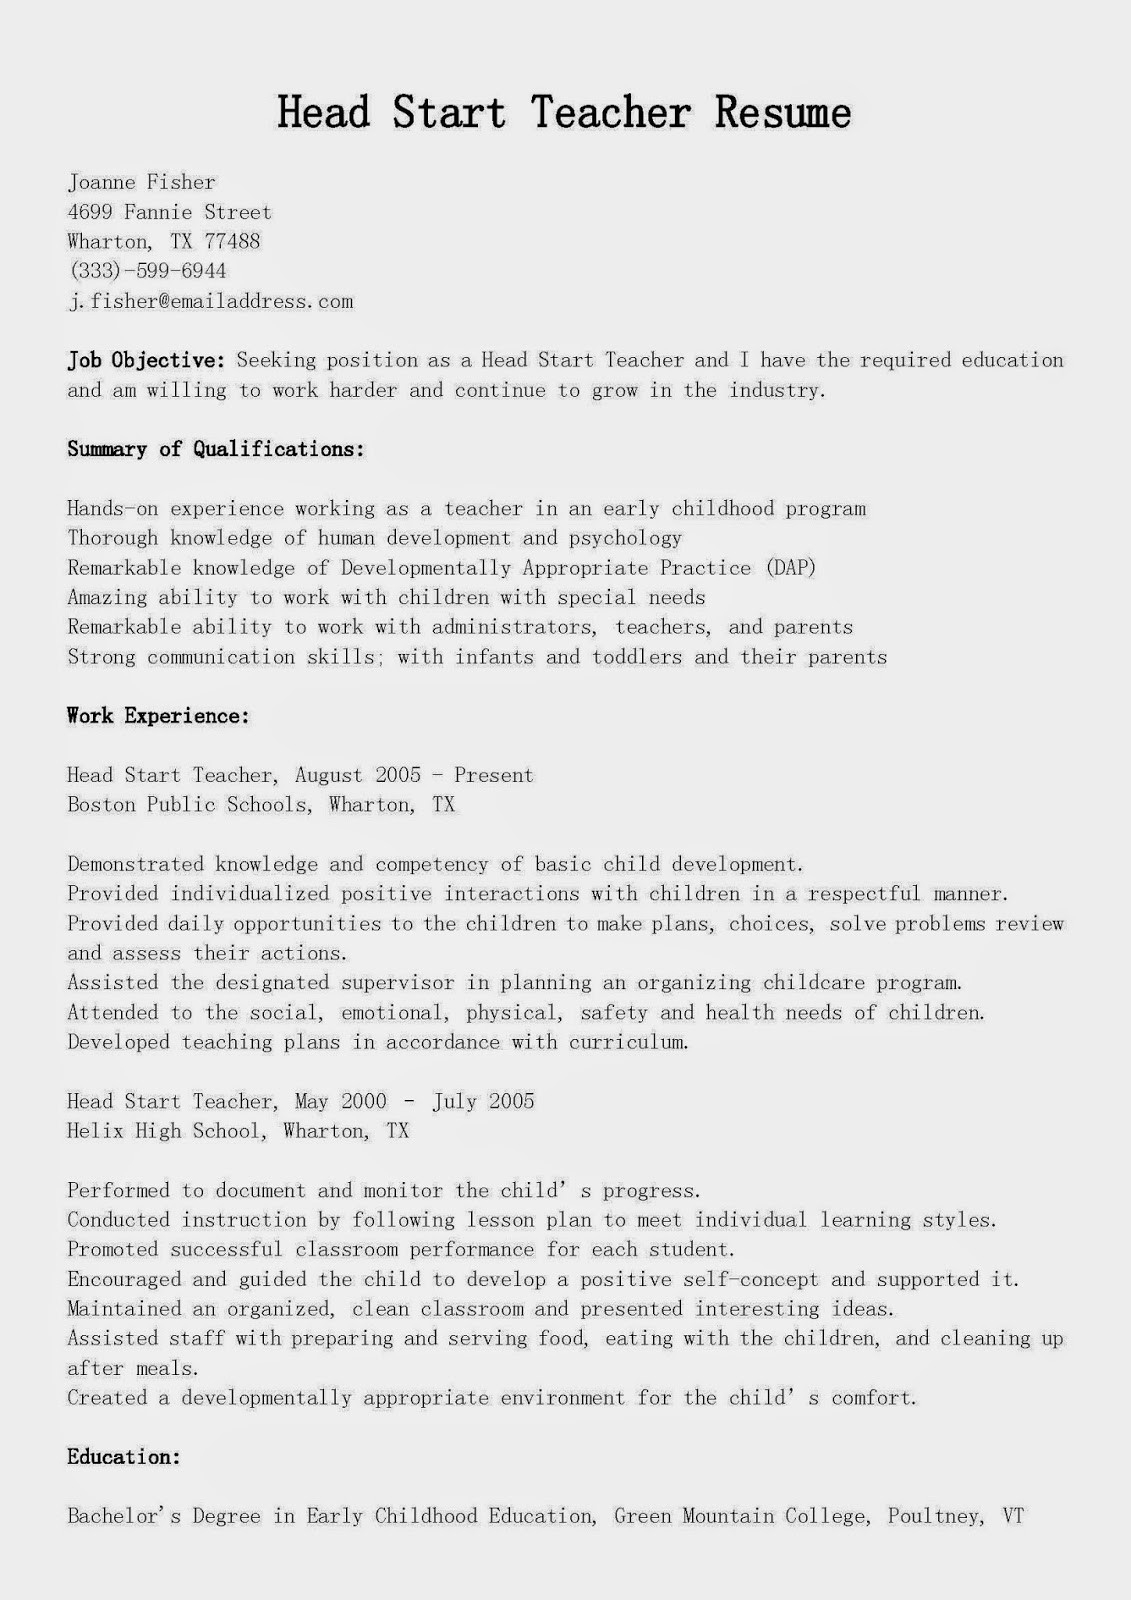 Quick Cover Letter Template - Resume Cover Letter Examples Luxury Higher Education Cover Letters